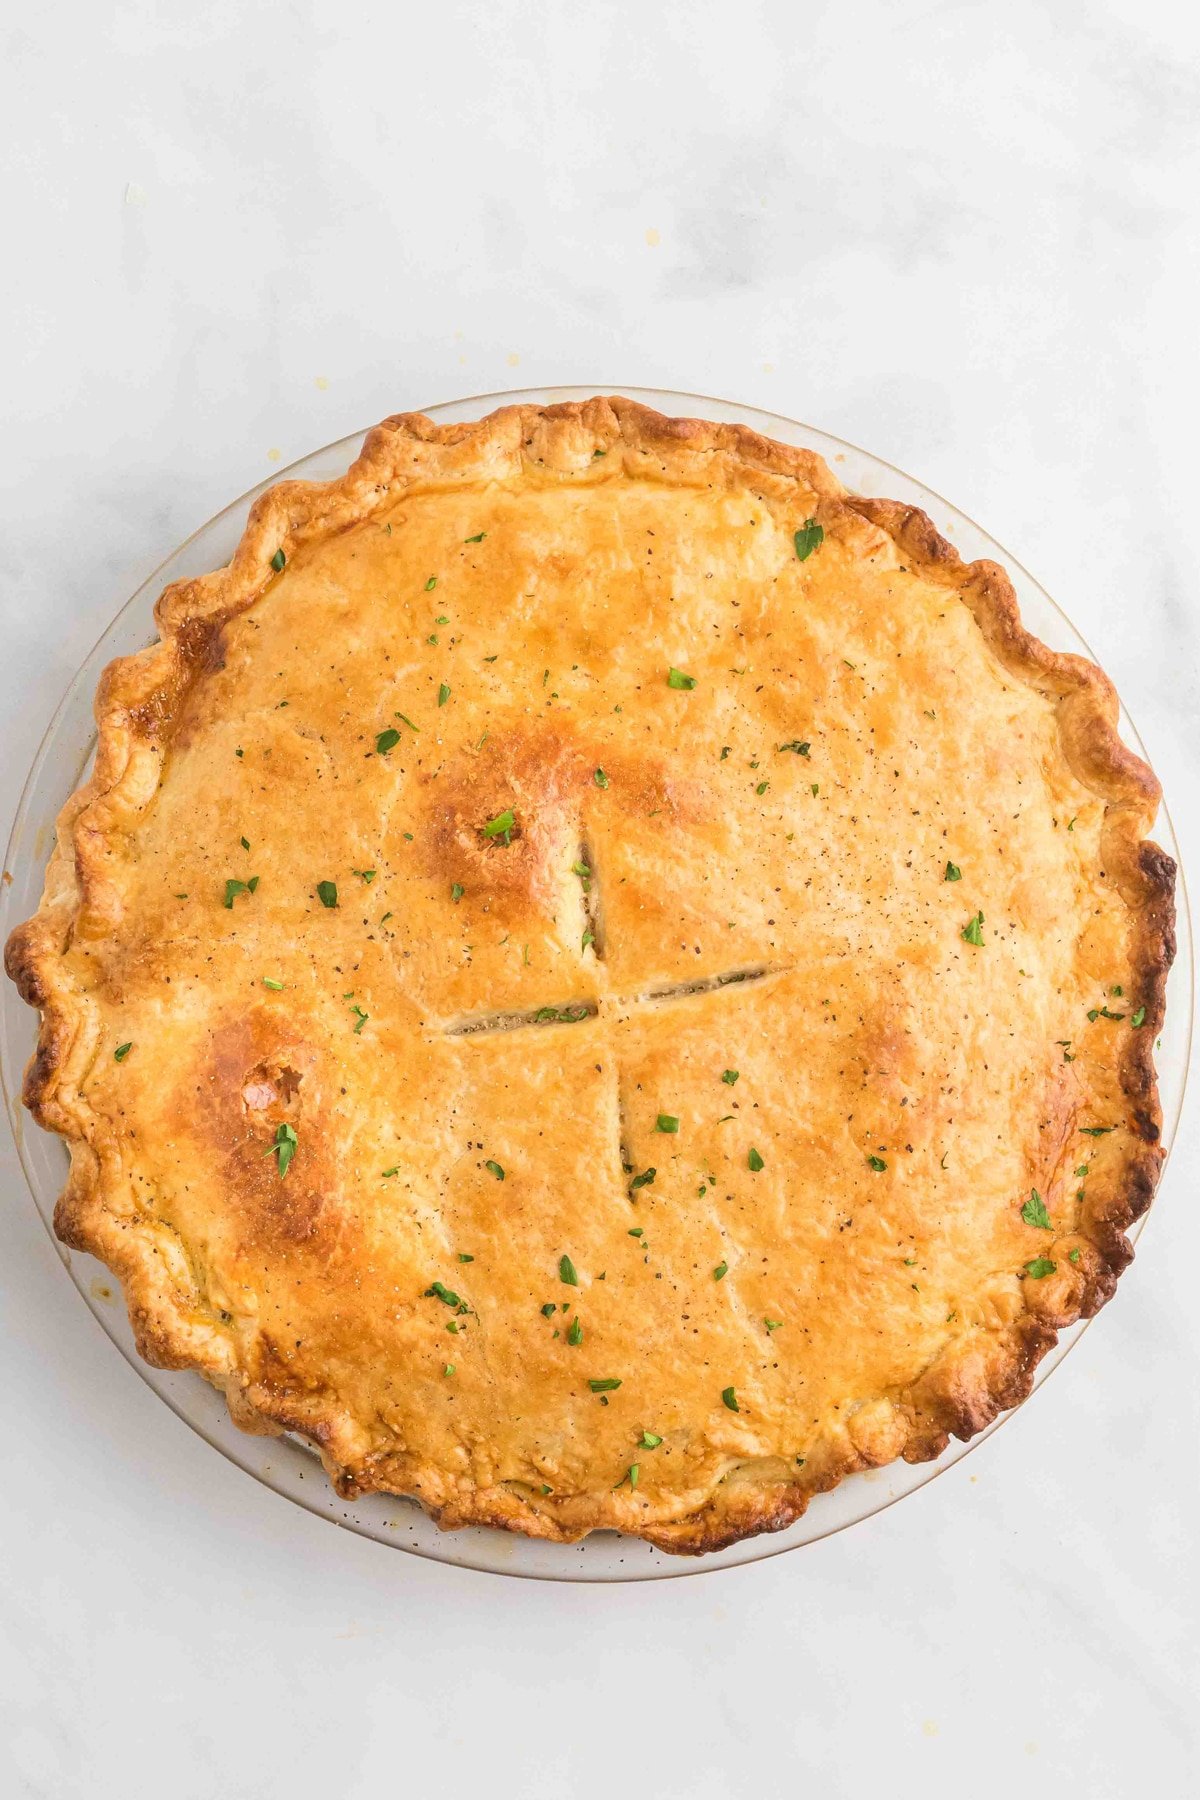 Overhead view of a freshly baked chicken pot pie